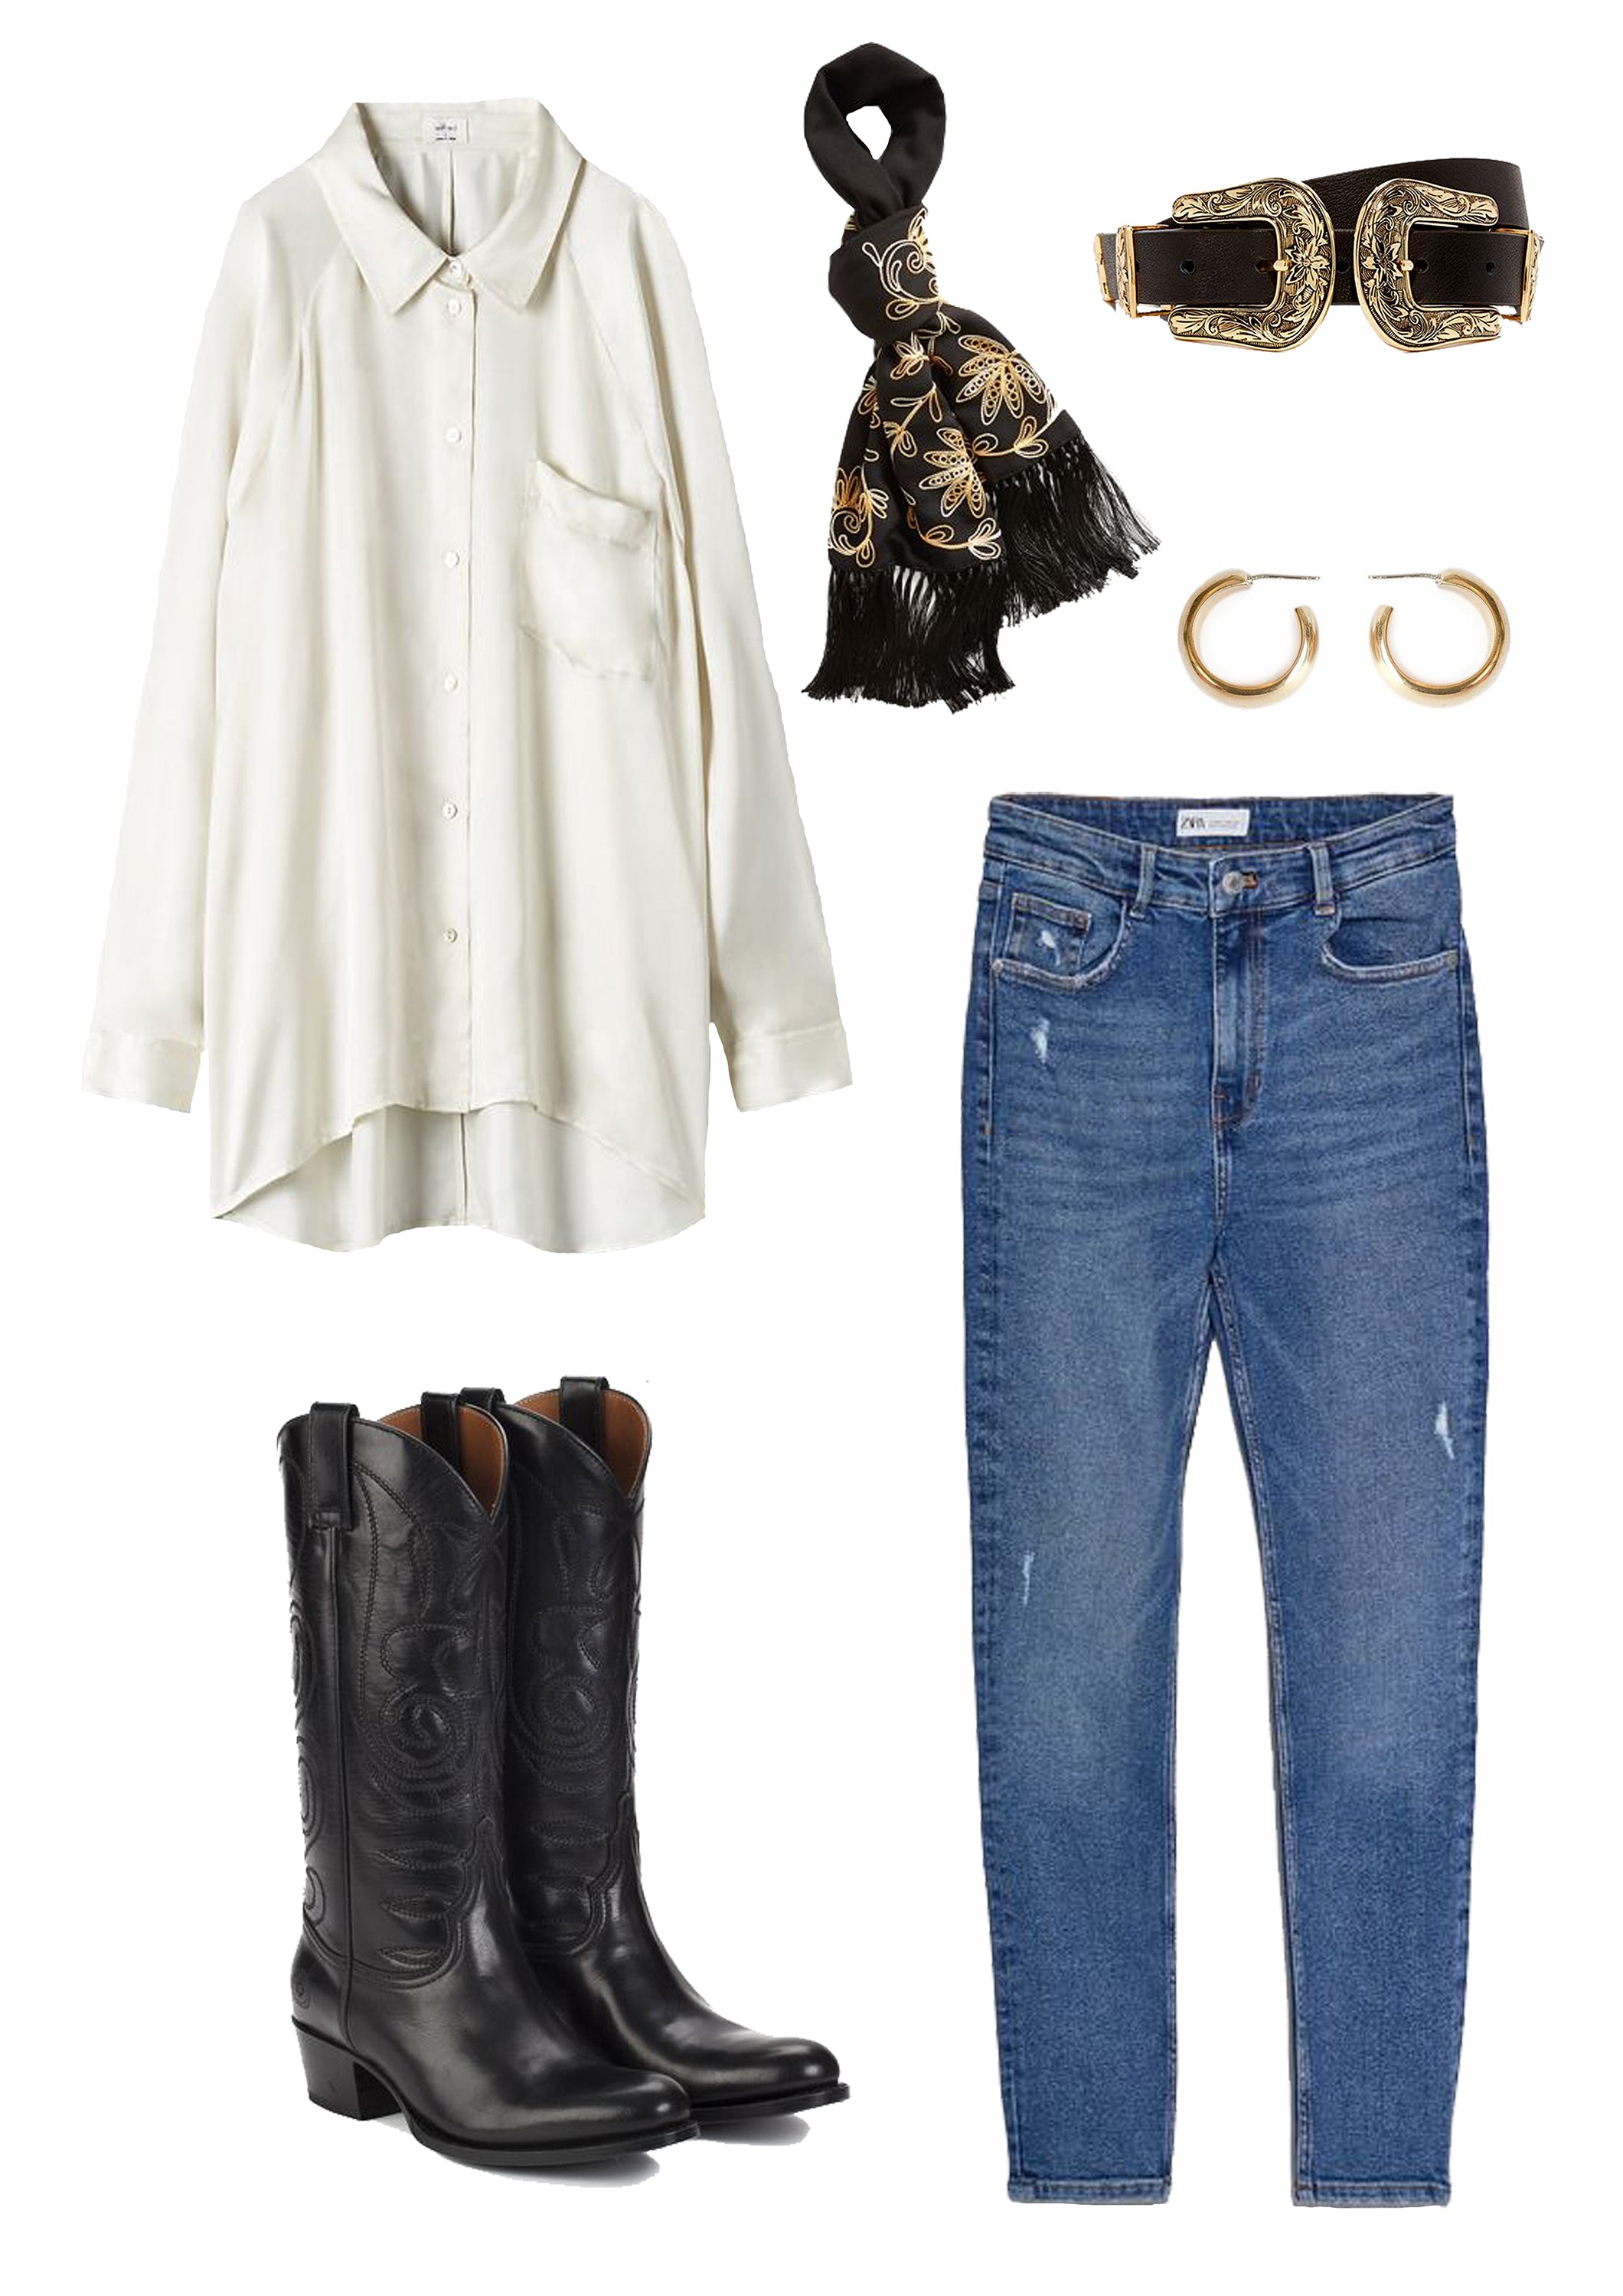 Women's Knee High Boots Outfit With Jeans  Fall boots outfit, High boots  outfit, Boots outfit